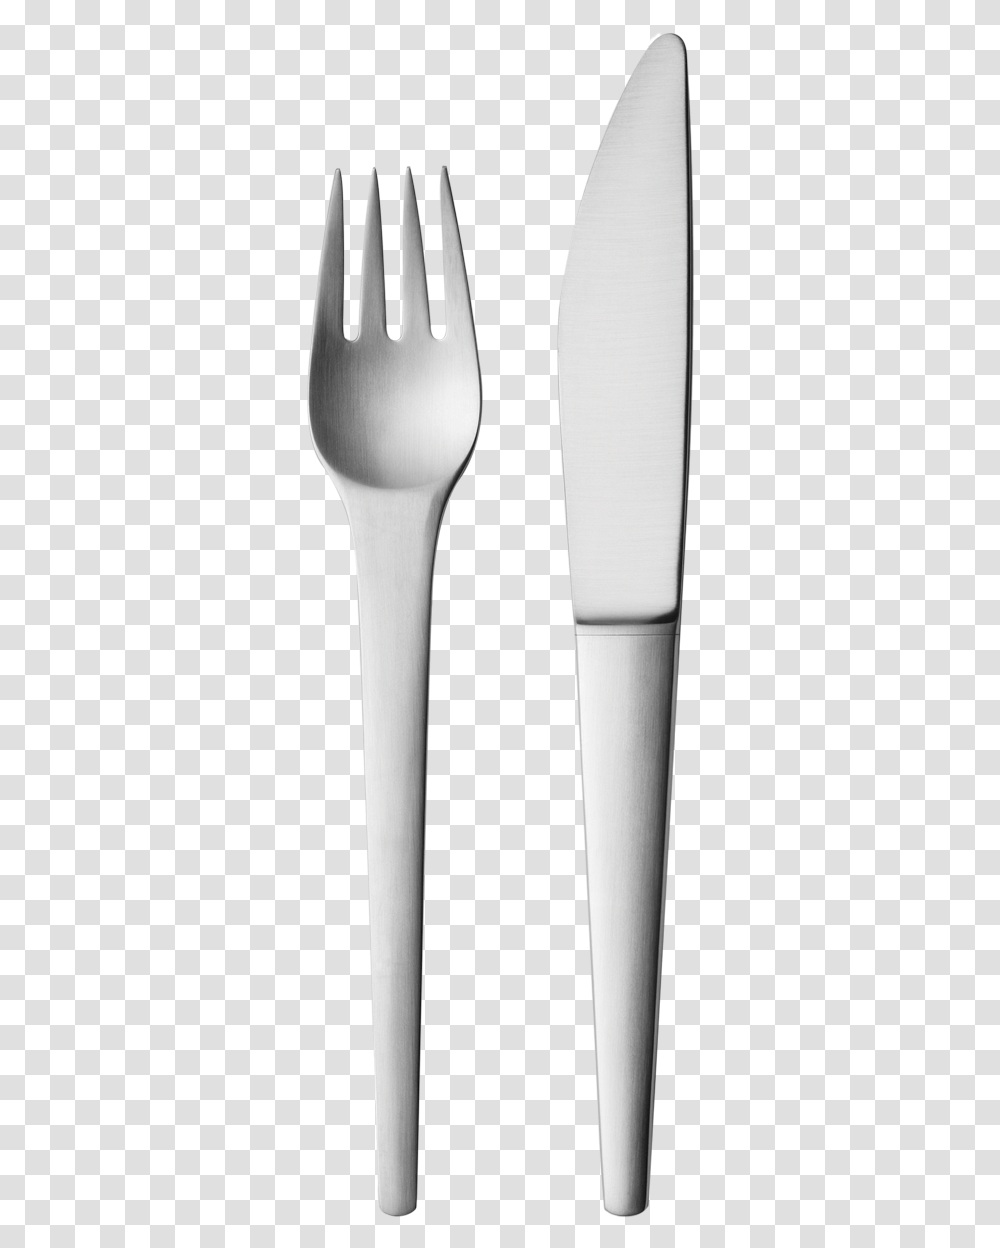 White Dinner Knife Knife And Fork, Cutlery, Spoon Transparent Png